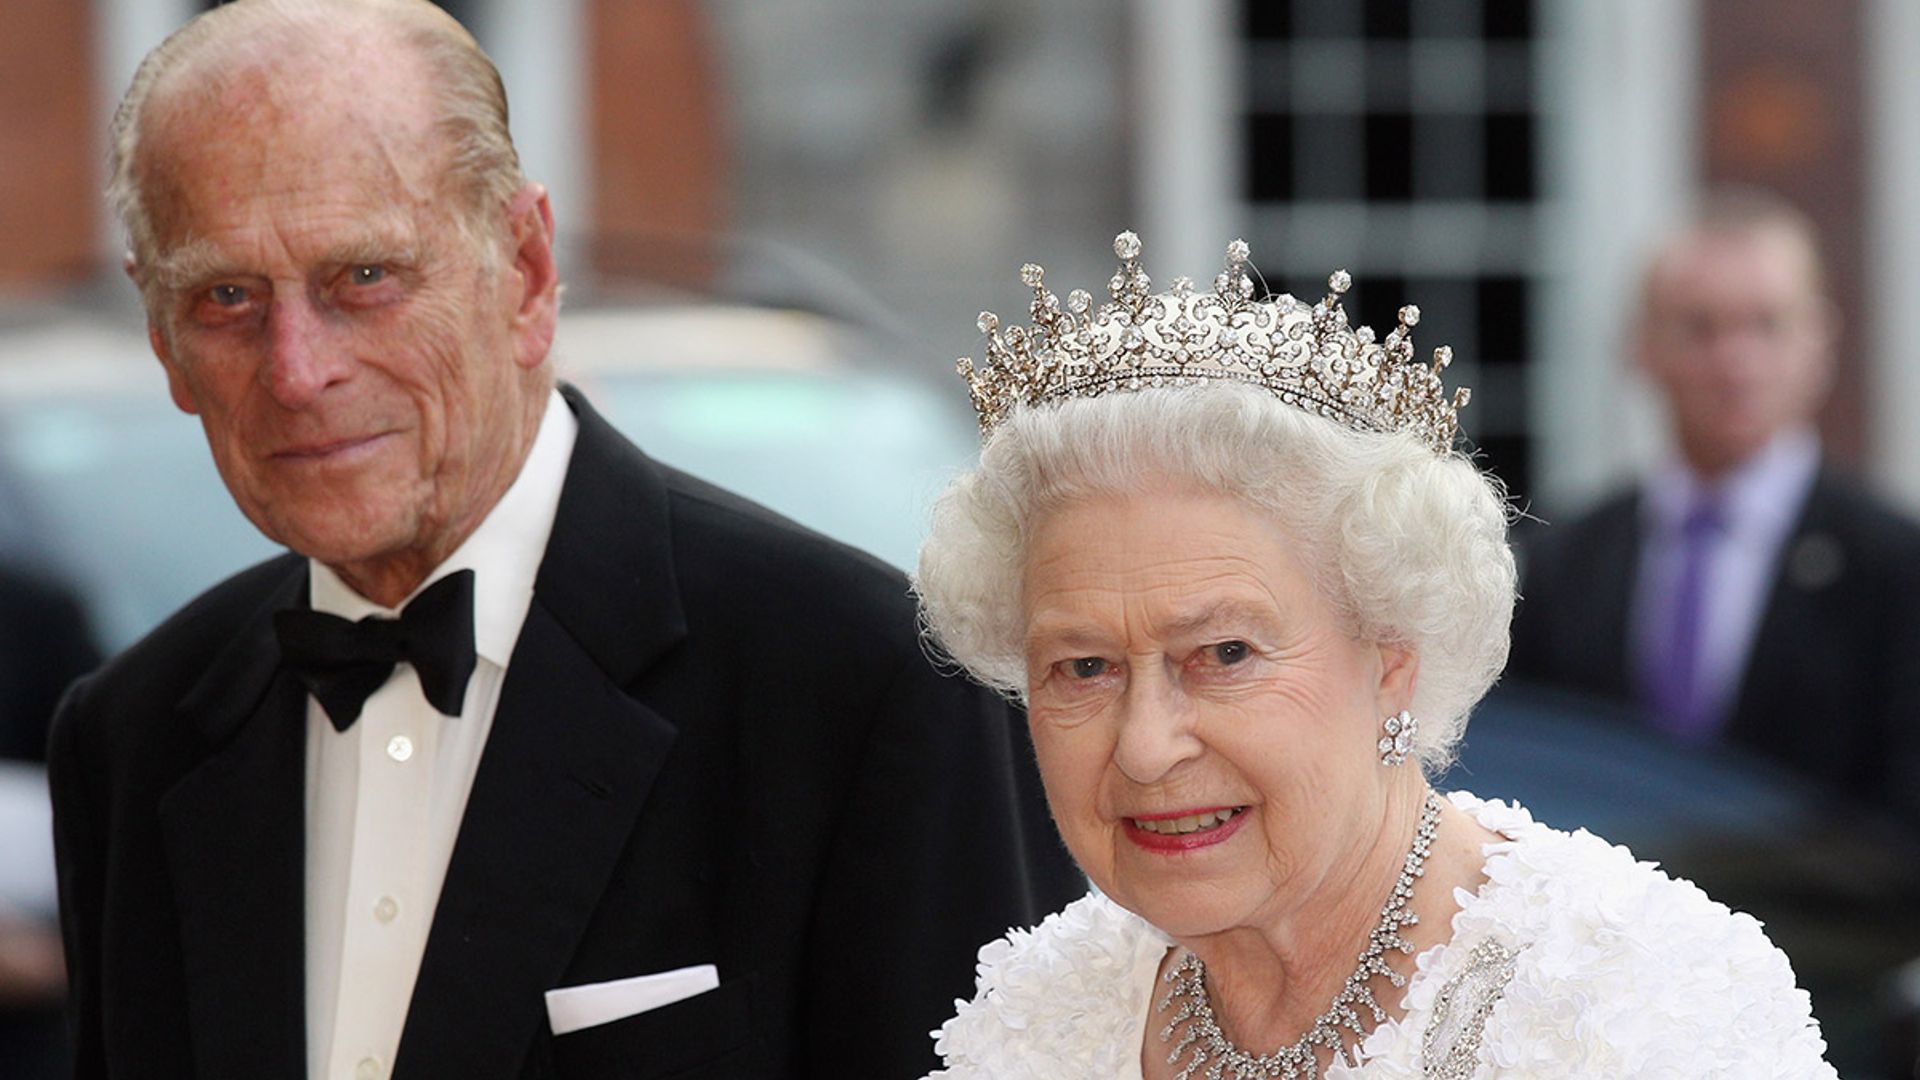 The Queen to hold 'thanksgiving' service for Prince Philip next year